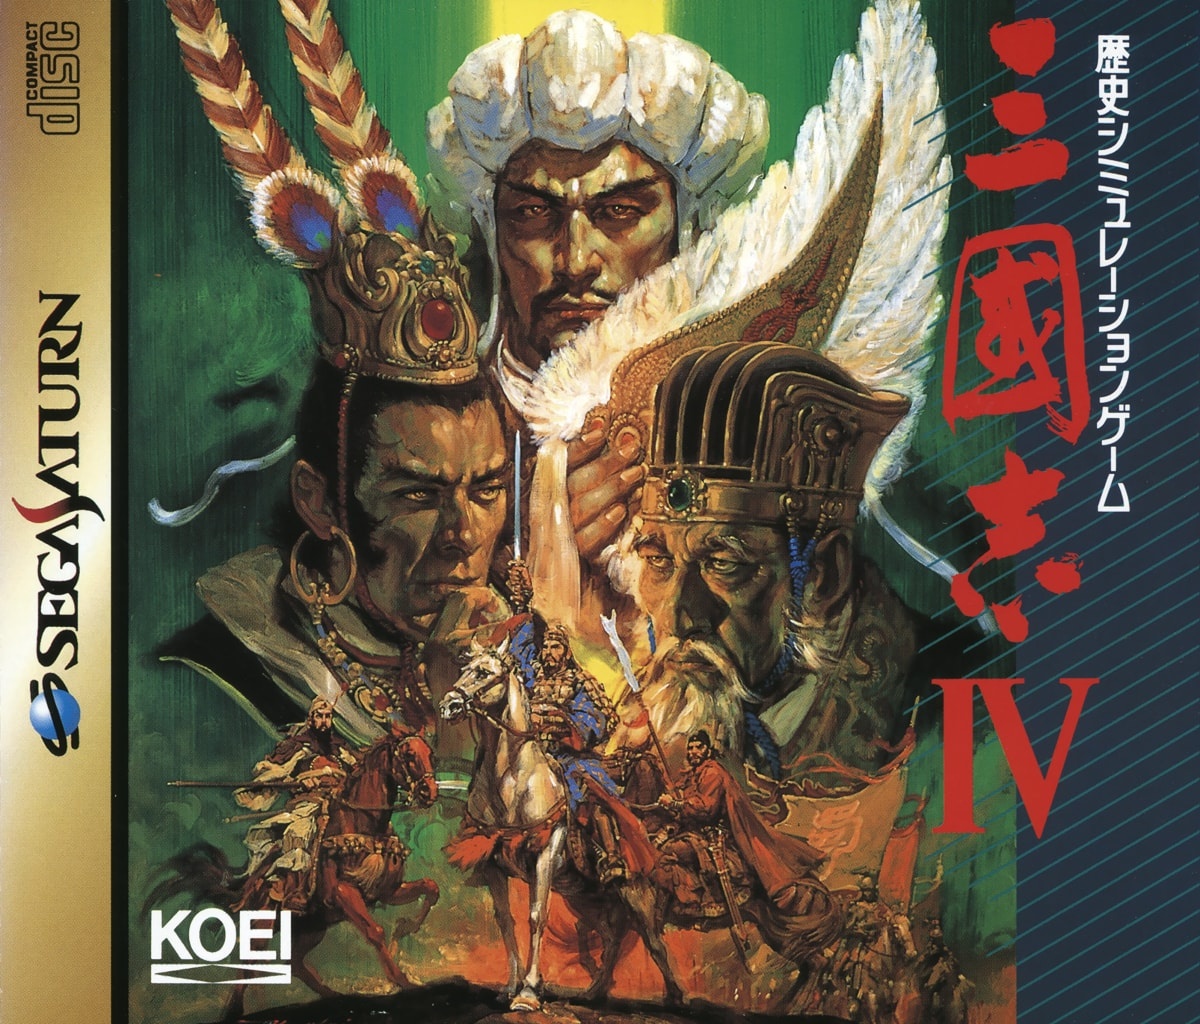 Romance of the Three Kingdoms IV: Wall of Fire cover